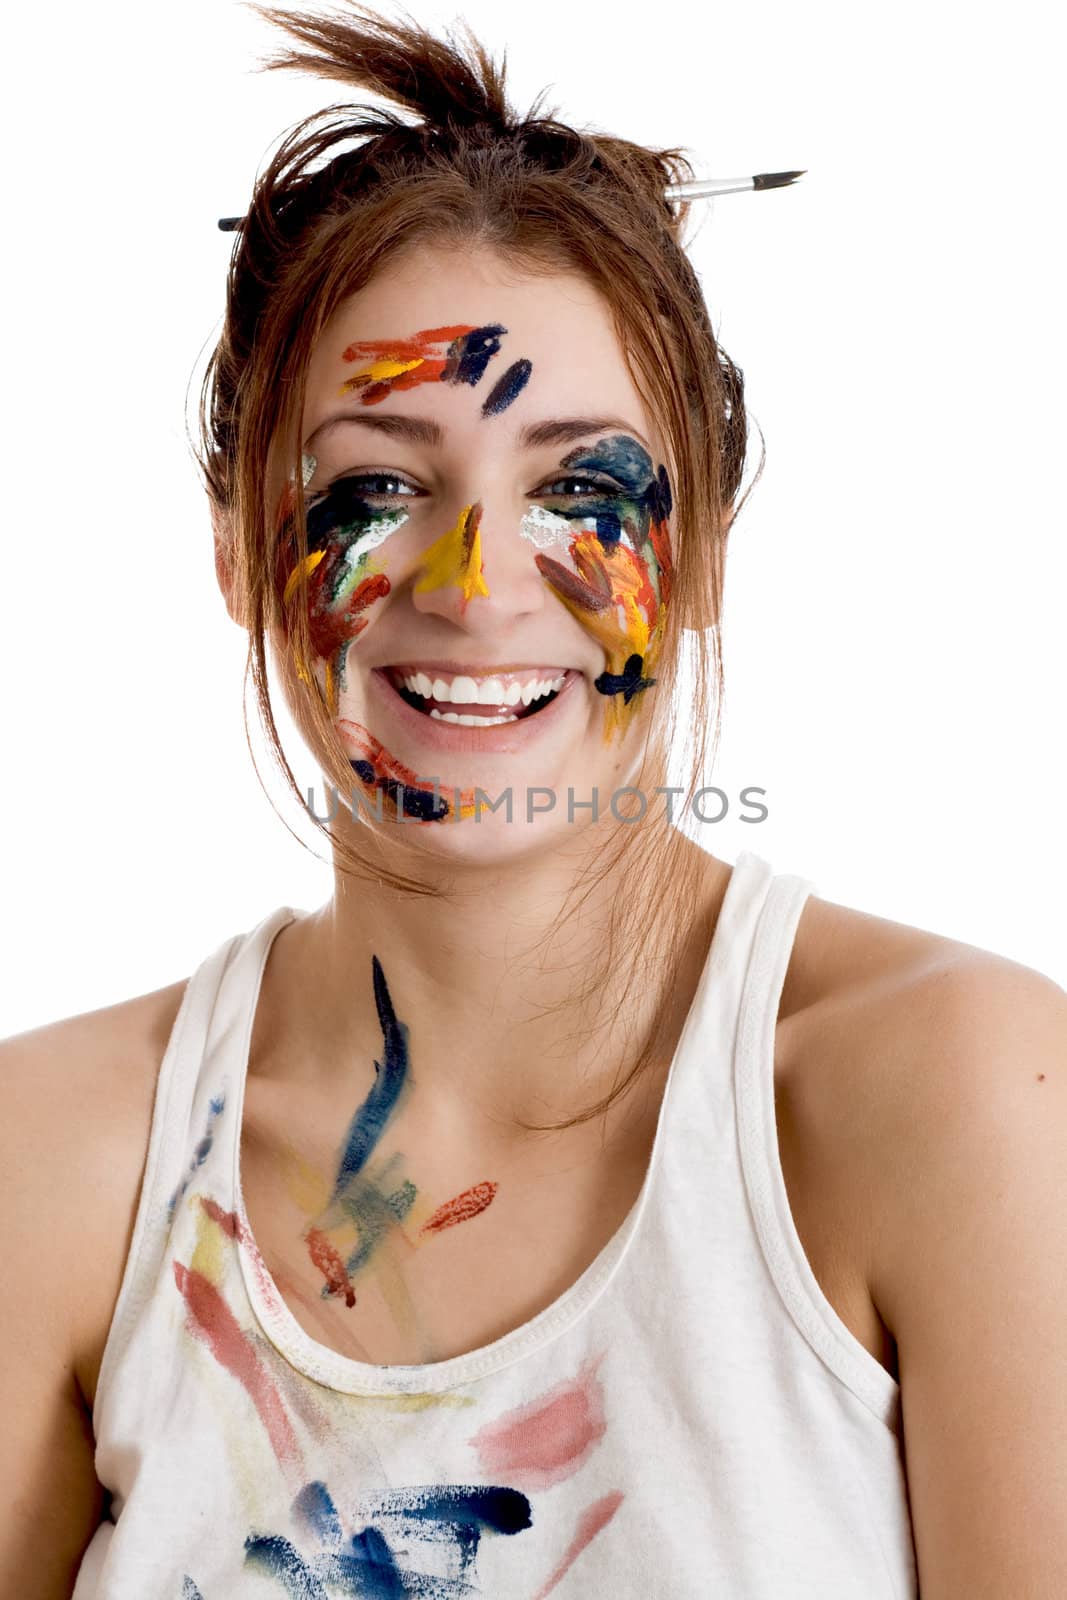 Female artist with paint smeared face isolated on white background